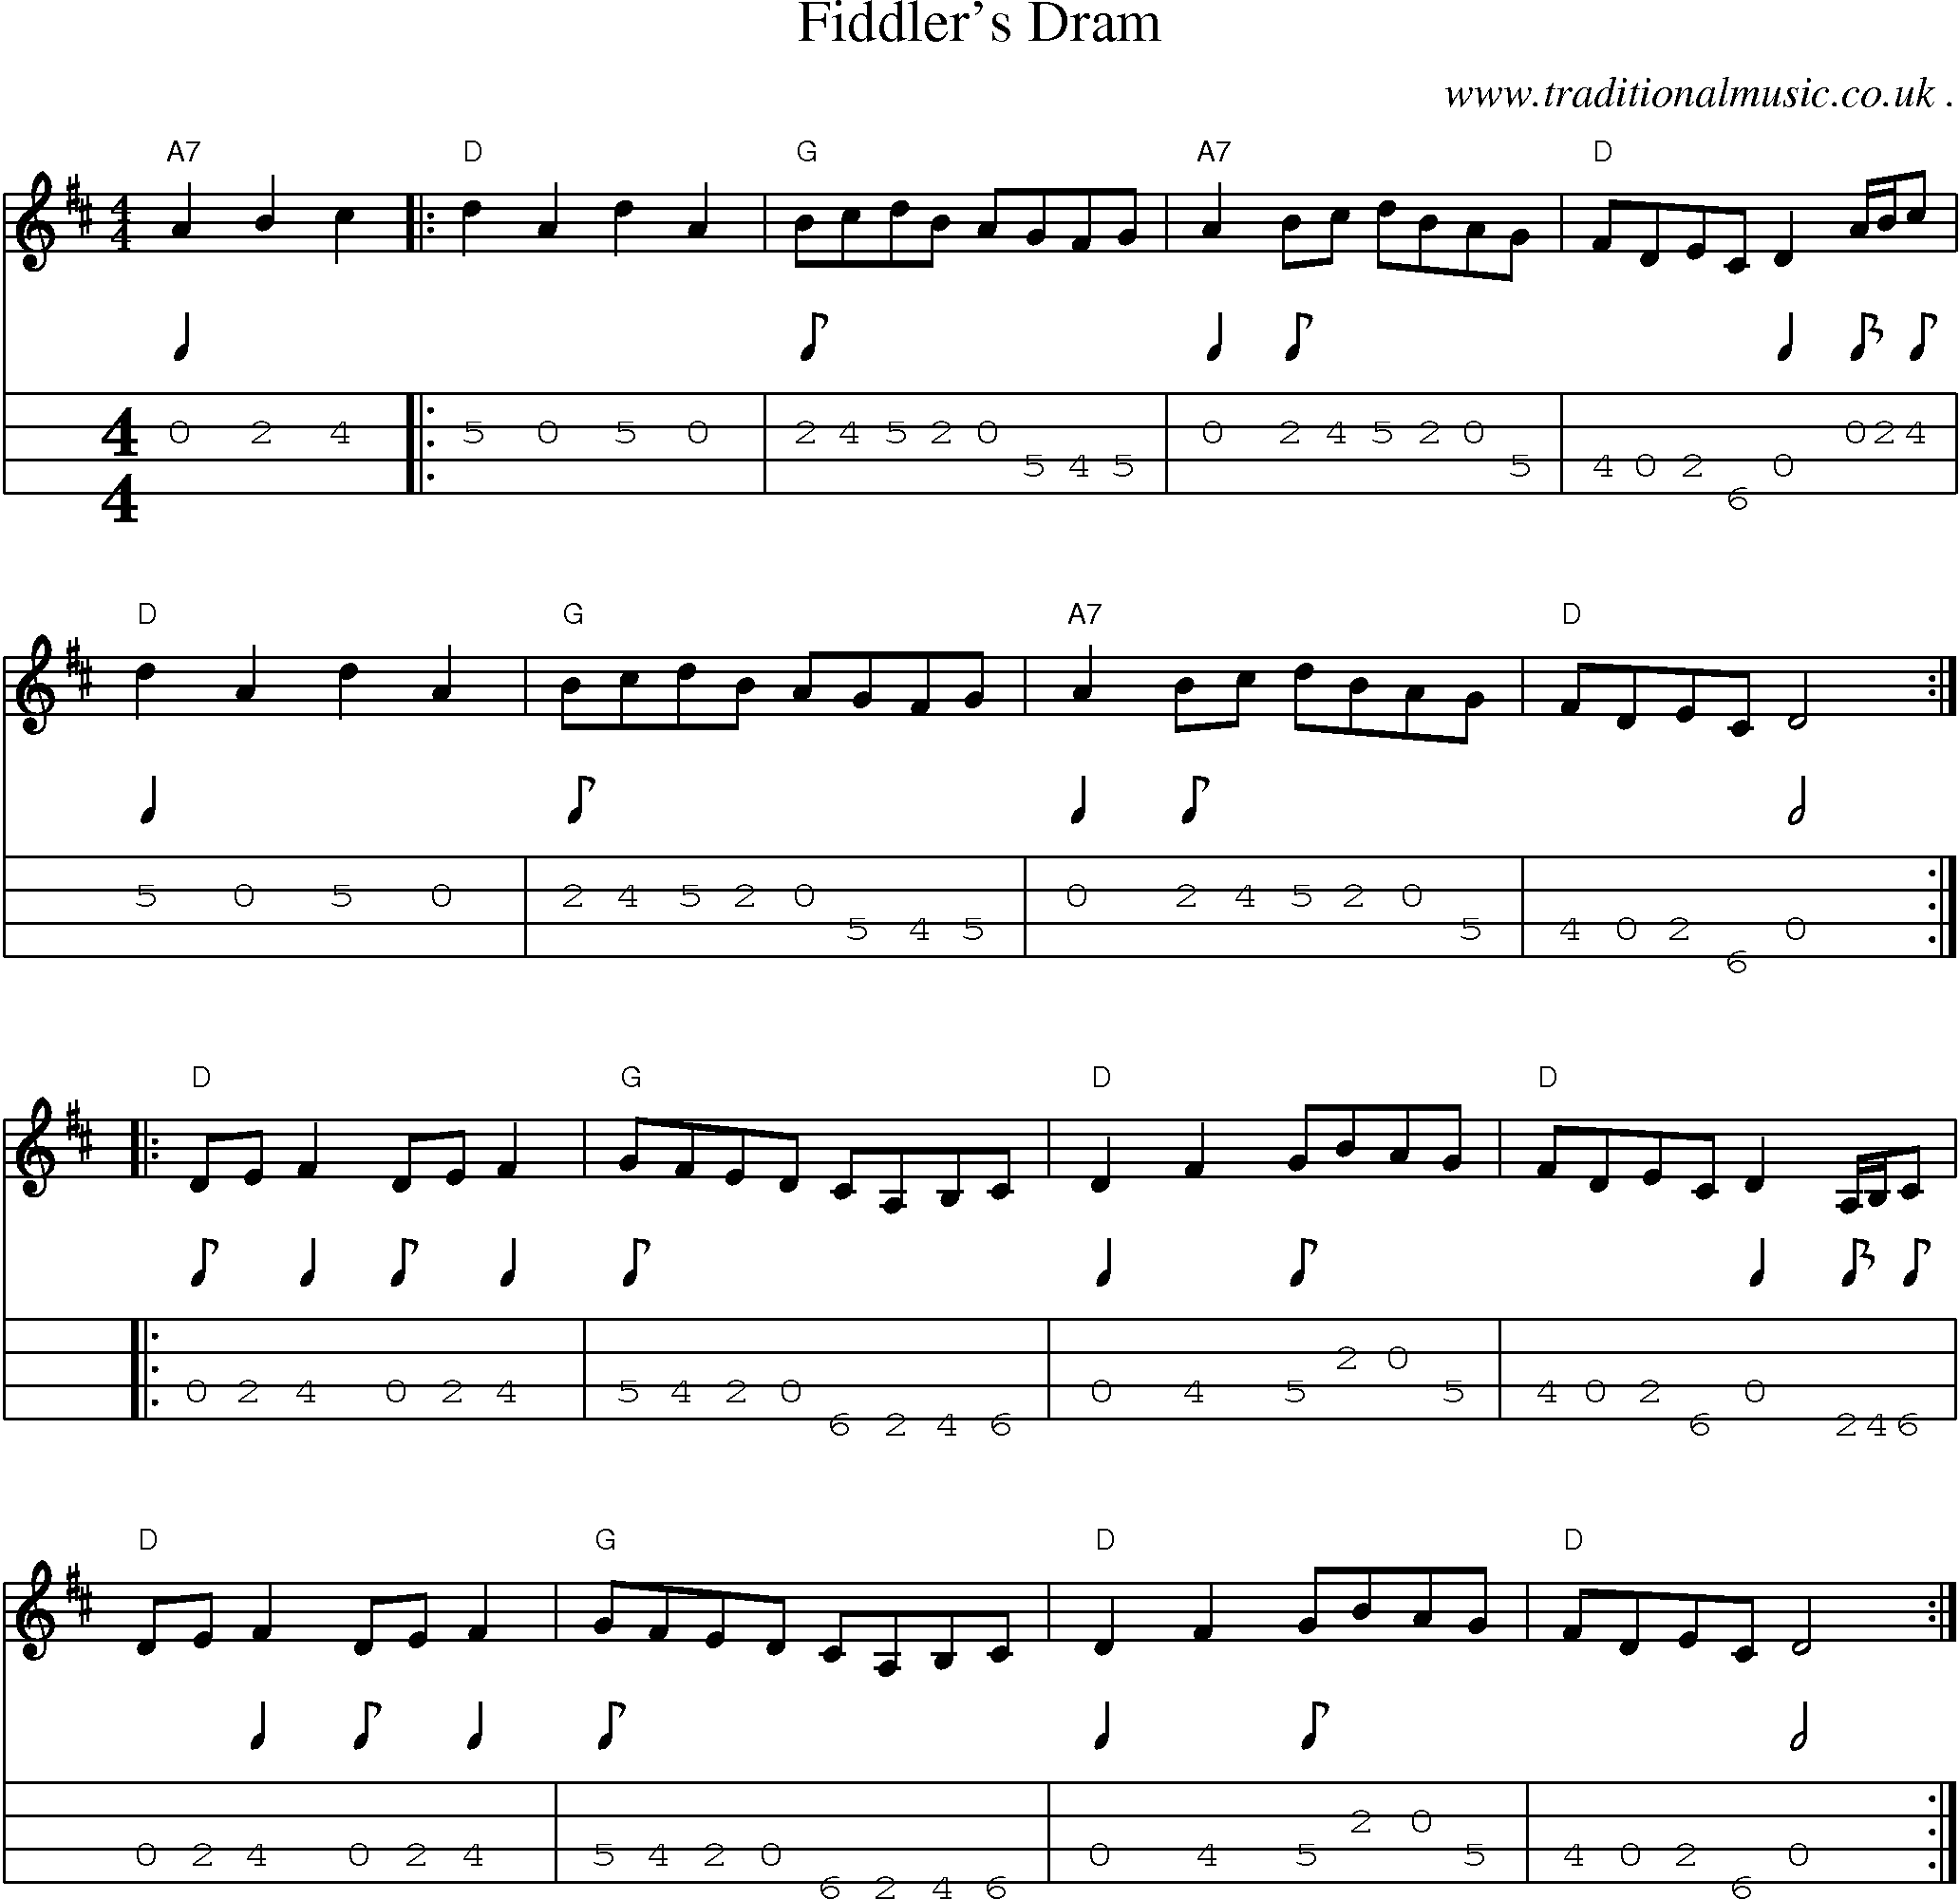 Music Score and Guitar Tabs for Fiddlers Dram